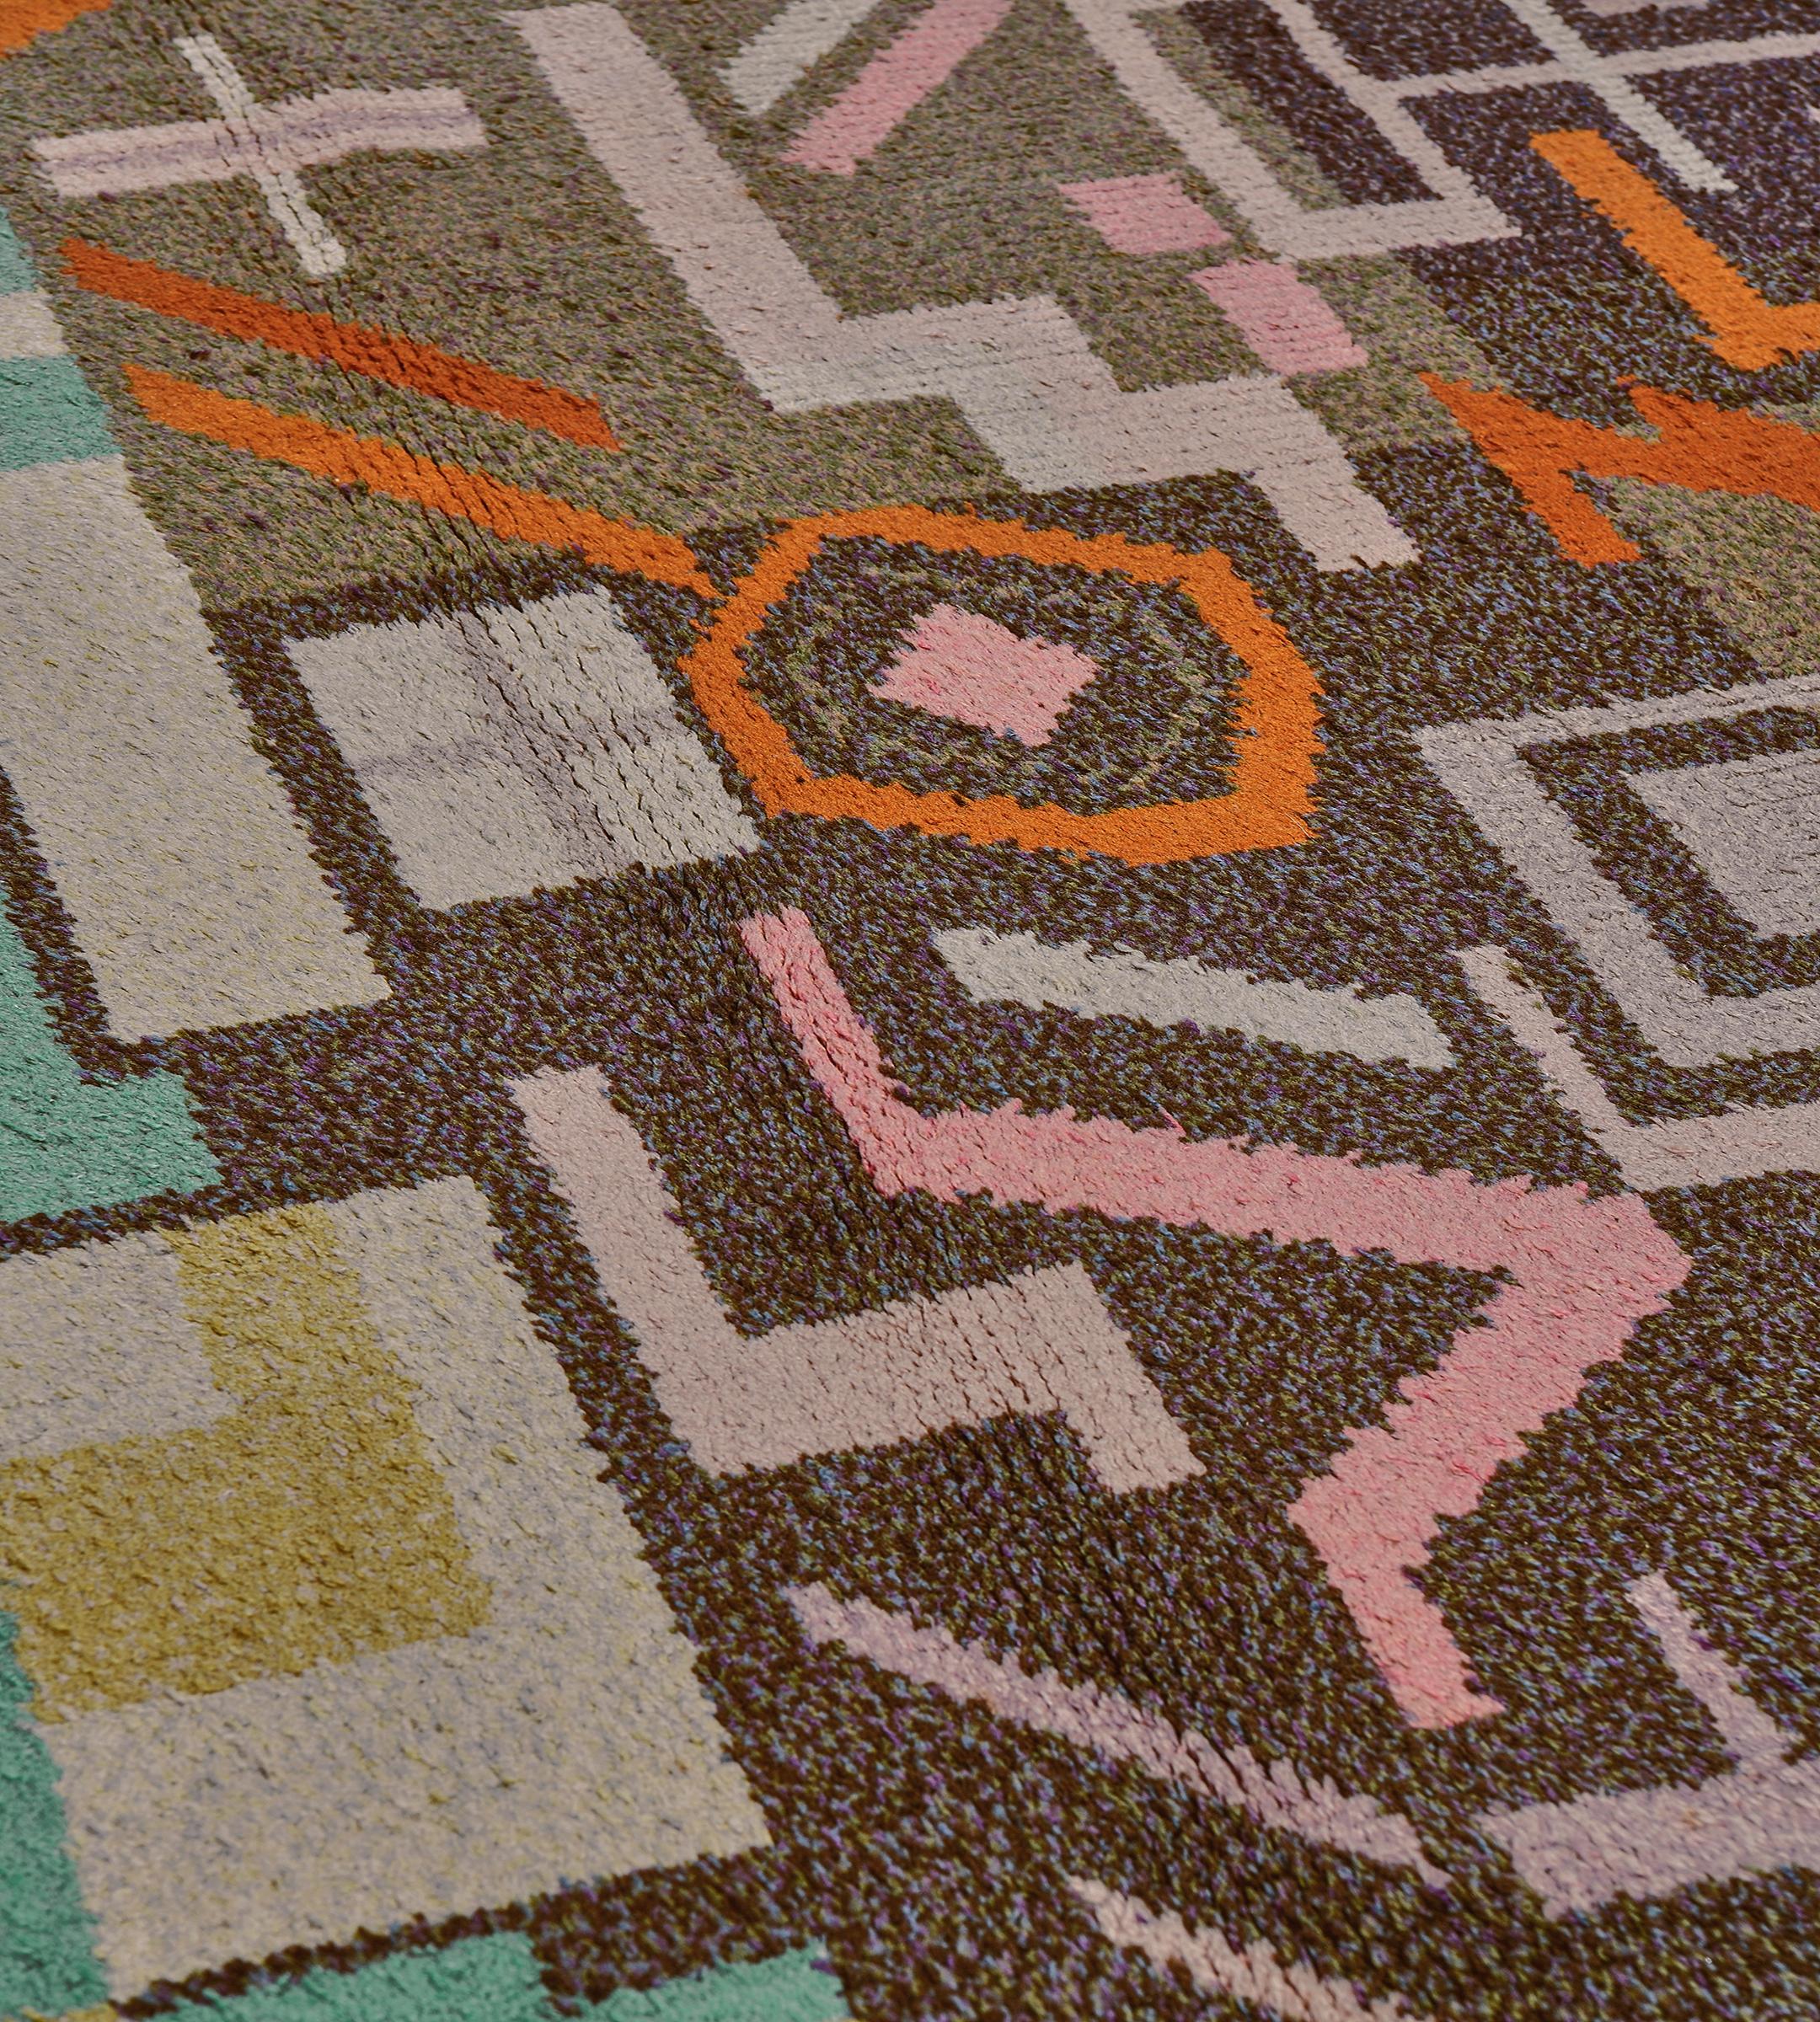 Hand-Knotted Antique Wool Geometric Deco Rug from Sweden In Excellent Condition For Sale In West Hollywood, CA